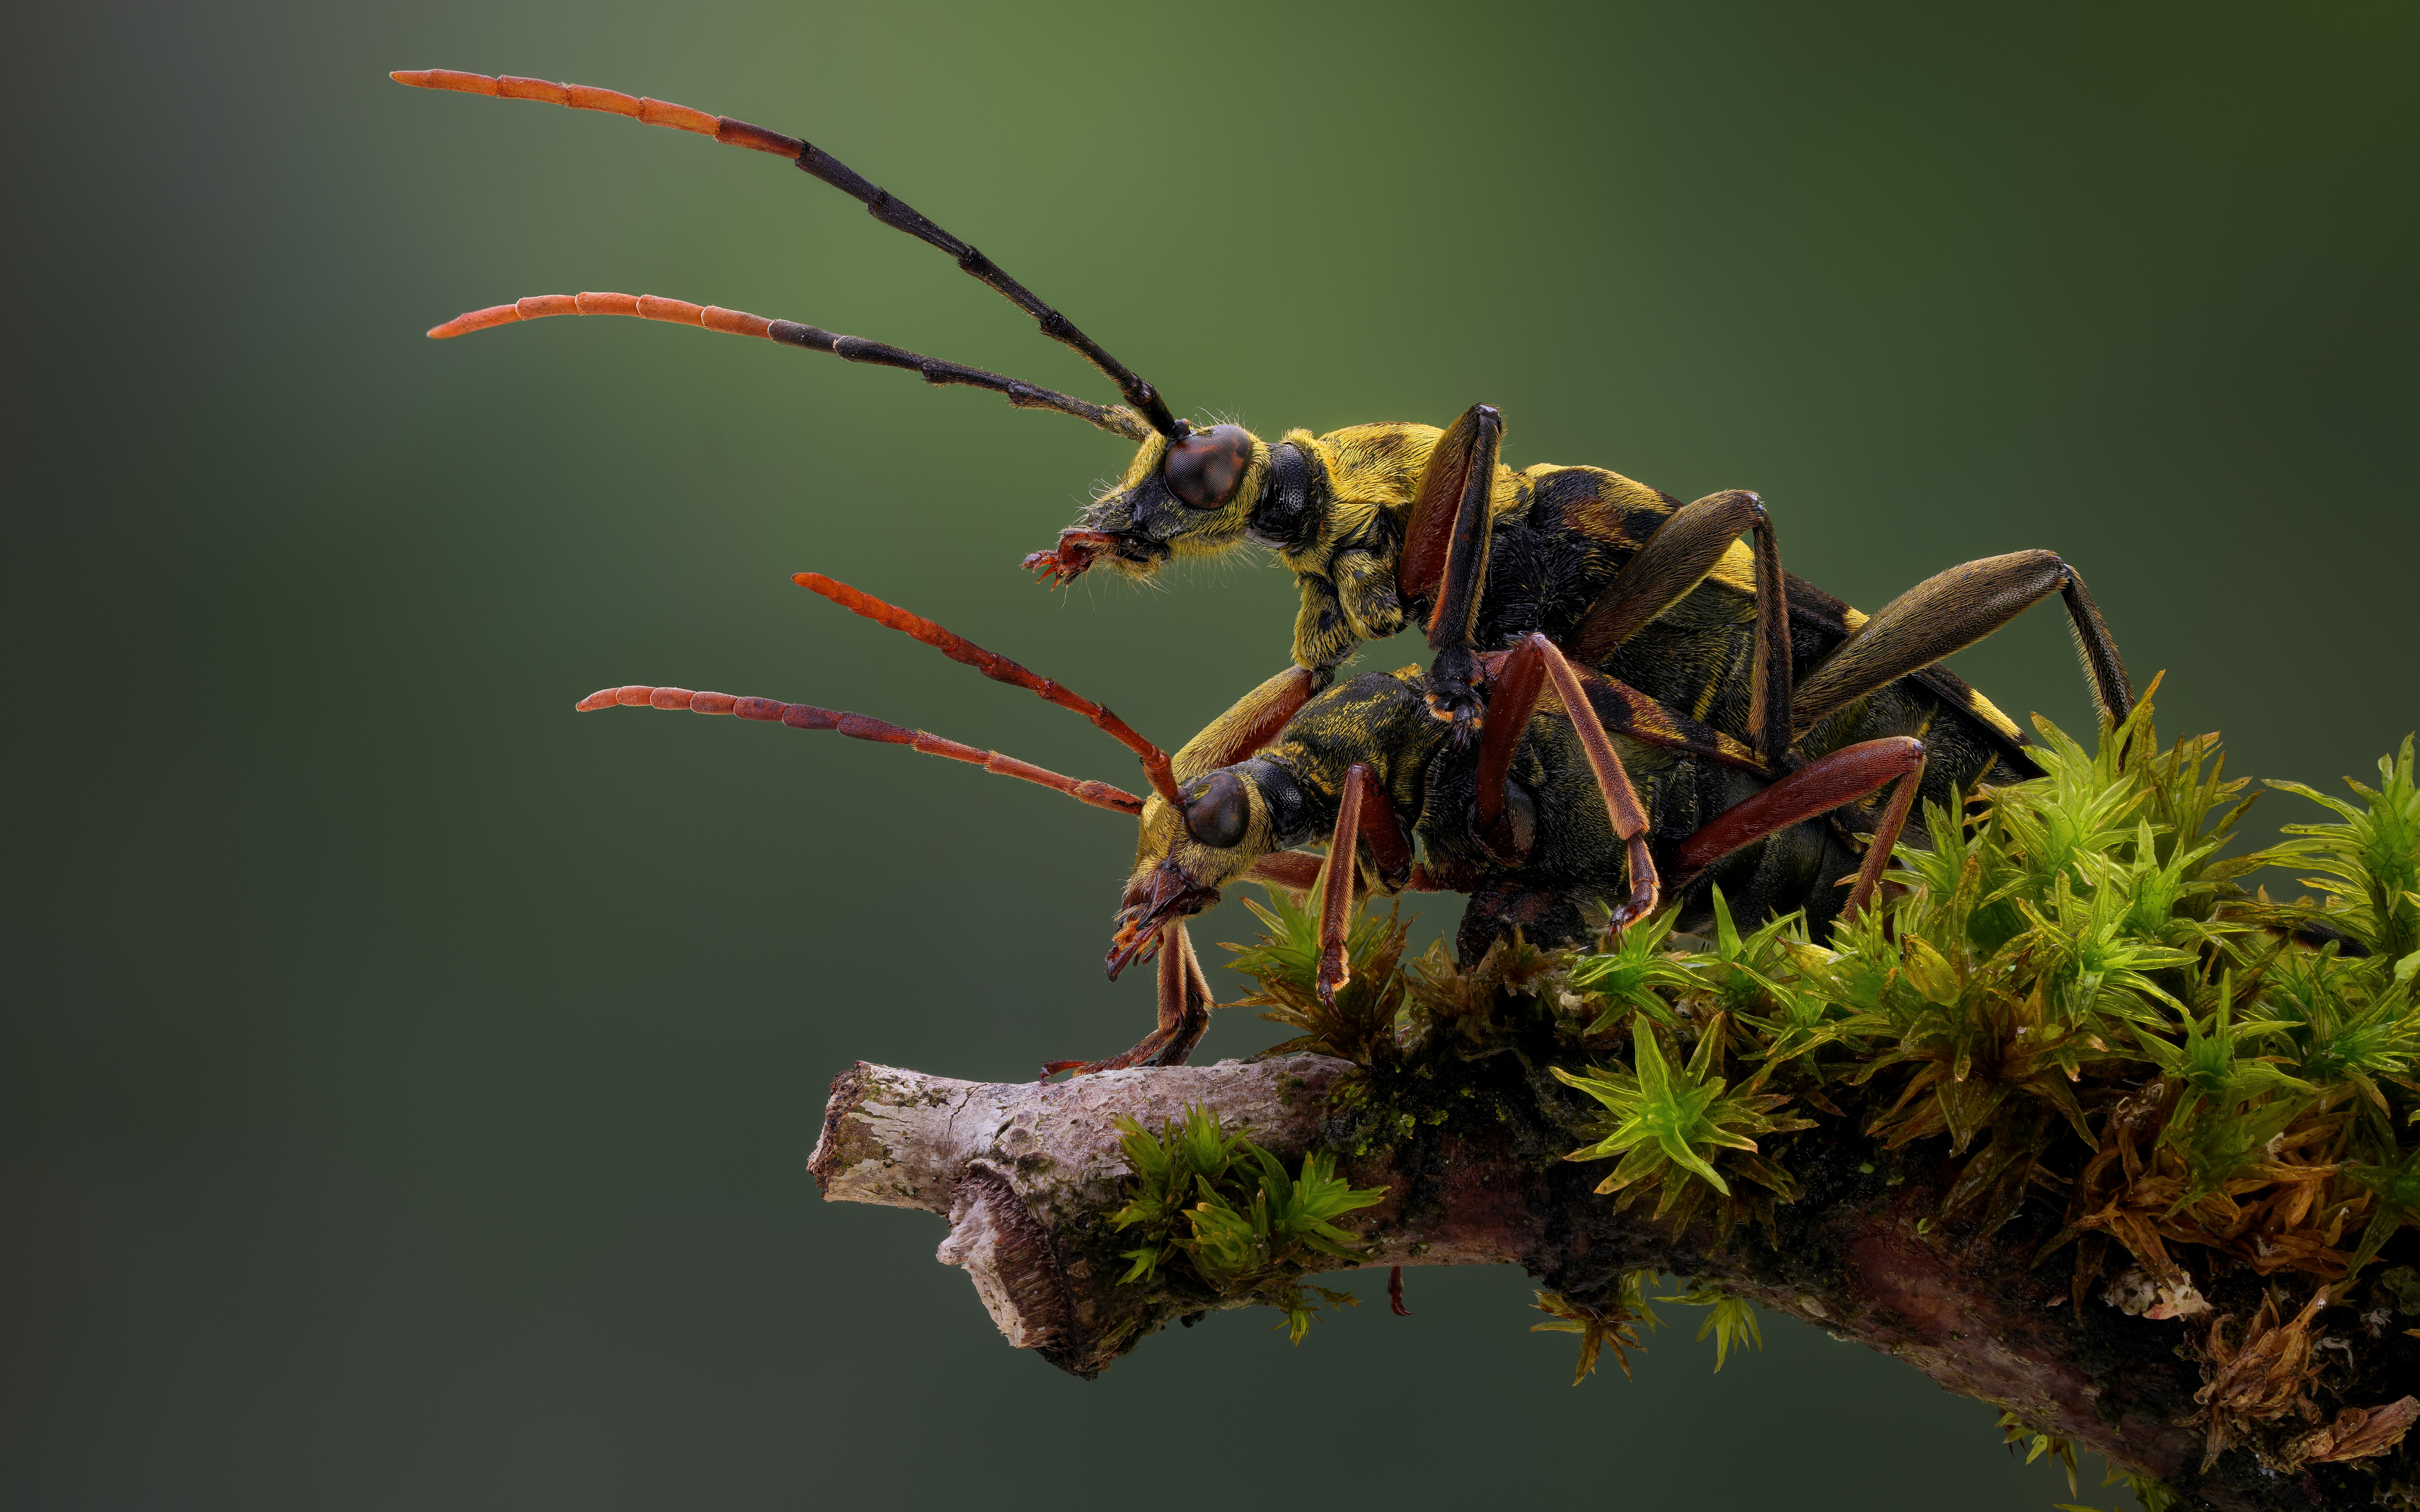 General 3840x2400 longhorn beetle macro branch moss nature closeup insect simple background minimalism depth of field Mating beetles